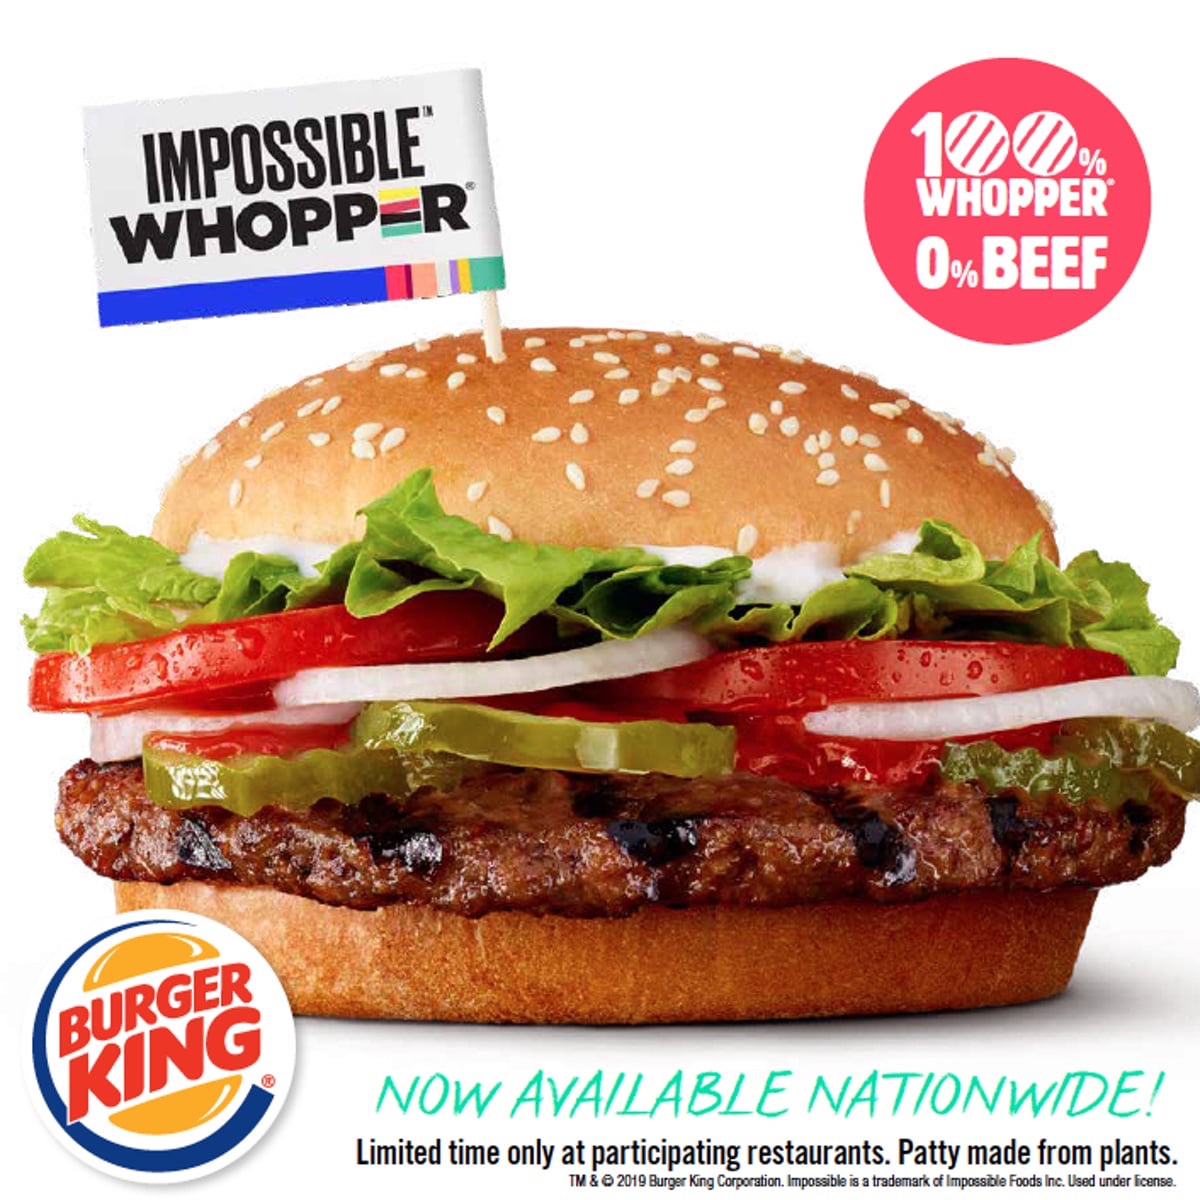 FAST FOOD NEWS Burger King Impossible Whopper The Impulsive Buy